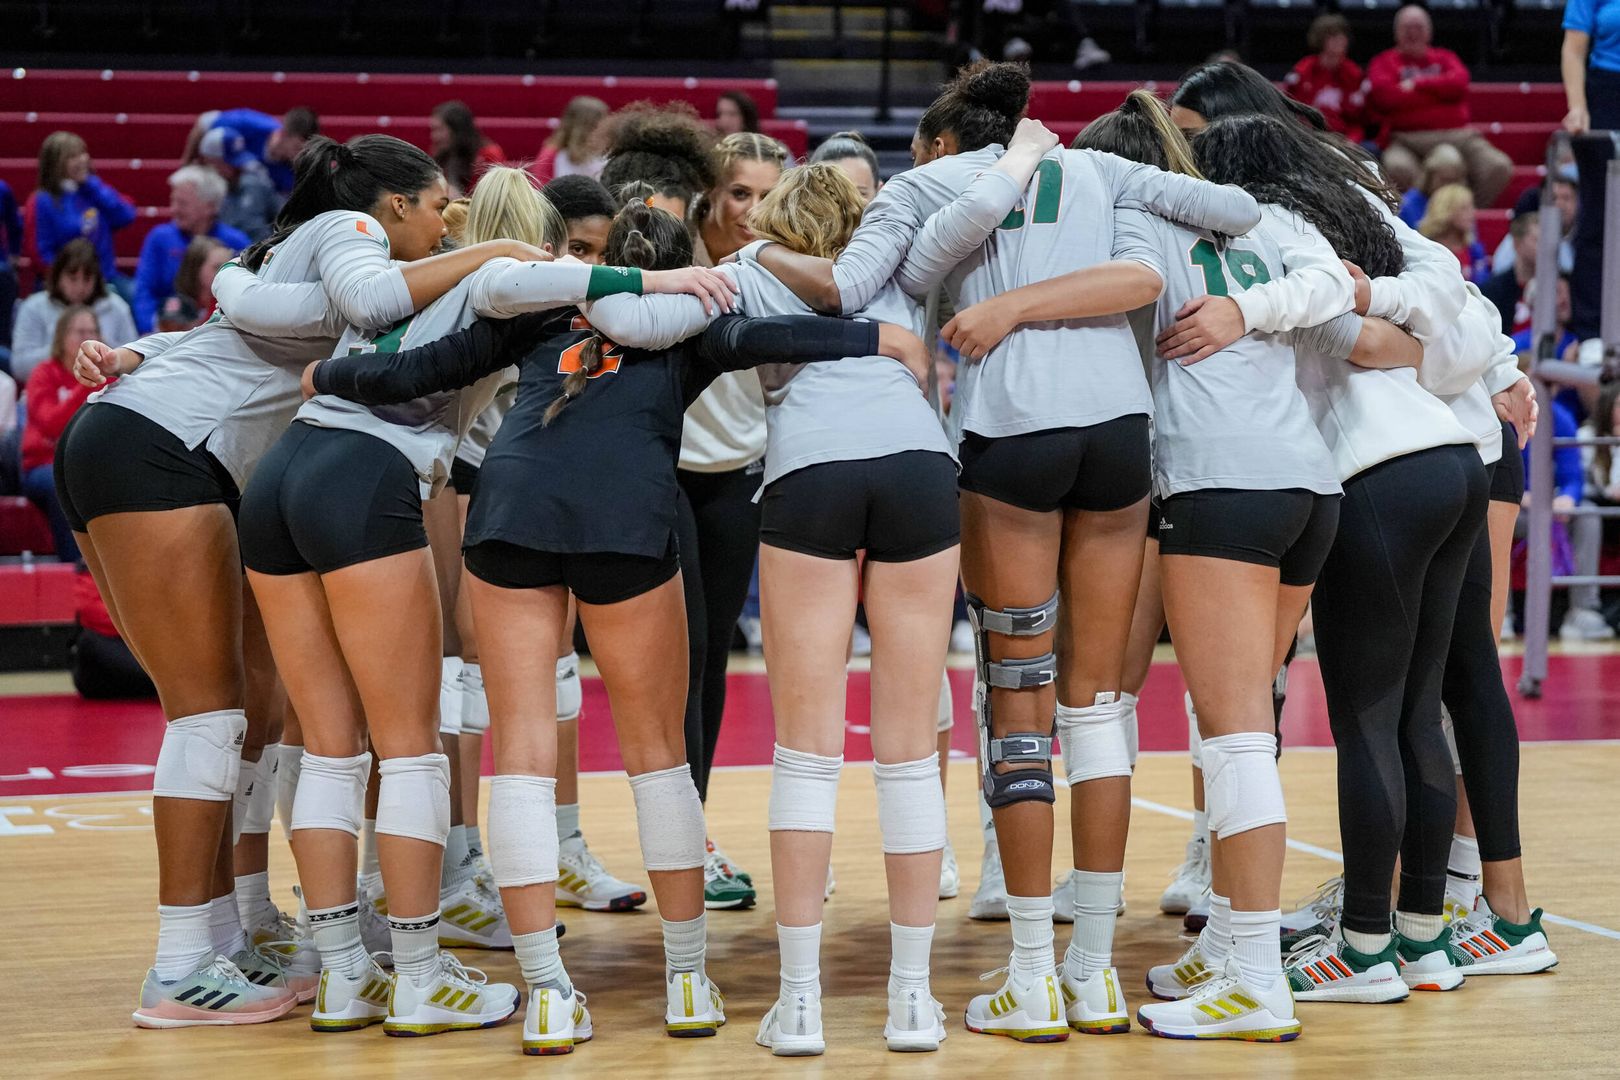 Canes Fall in Opening Round of 2022 NCAA Division I Volleyball Championship